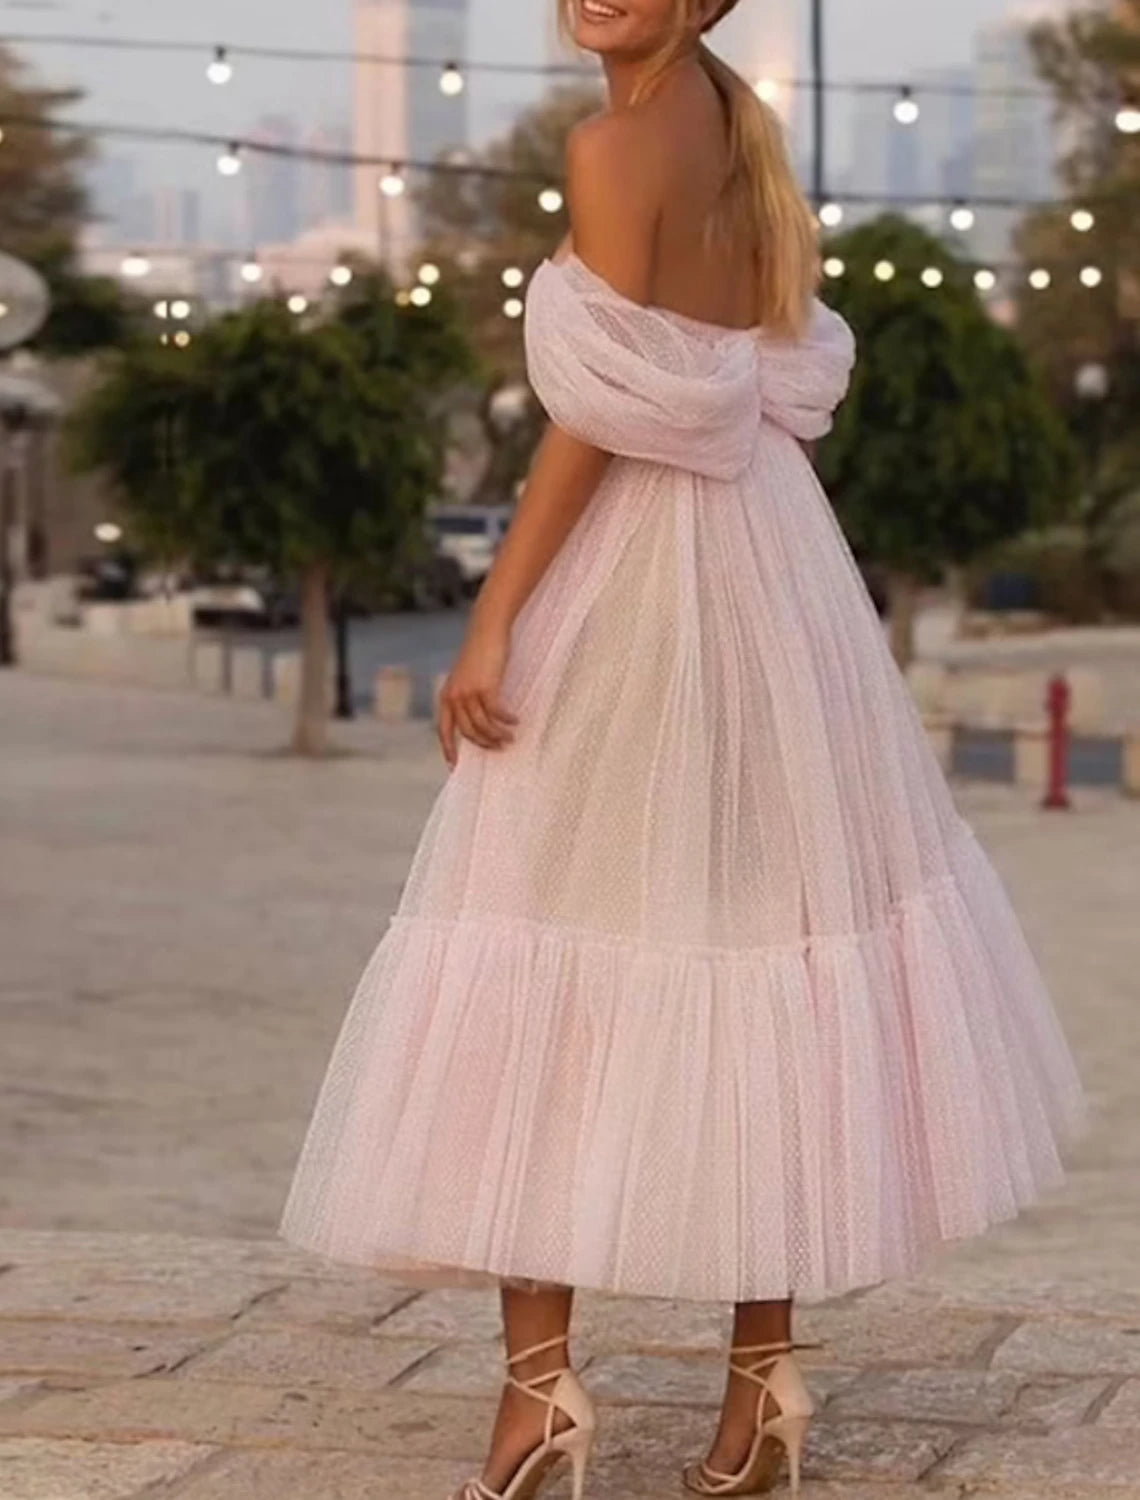 A-Line Prom Dresses Princess Dress Wedding Guest Homecoming Ankle Length Short Sleeve Strapless Pink Dress Tulle with Ruched